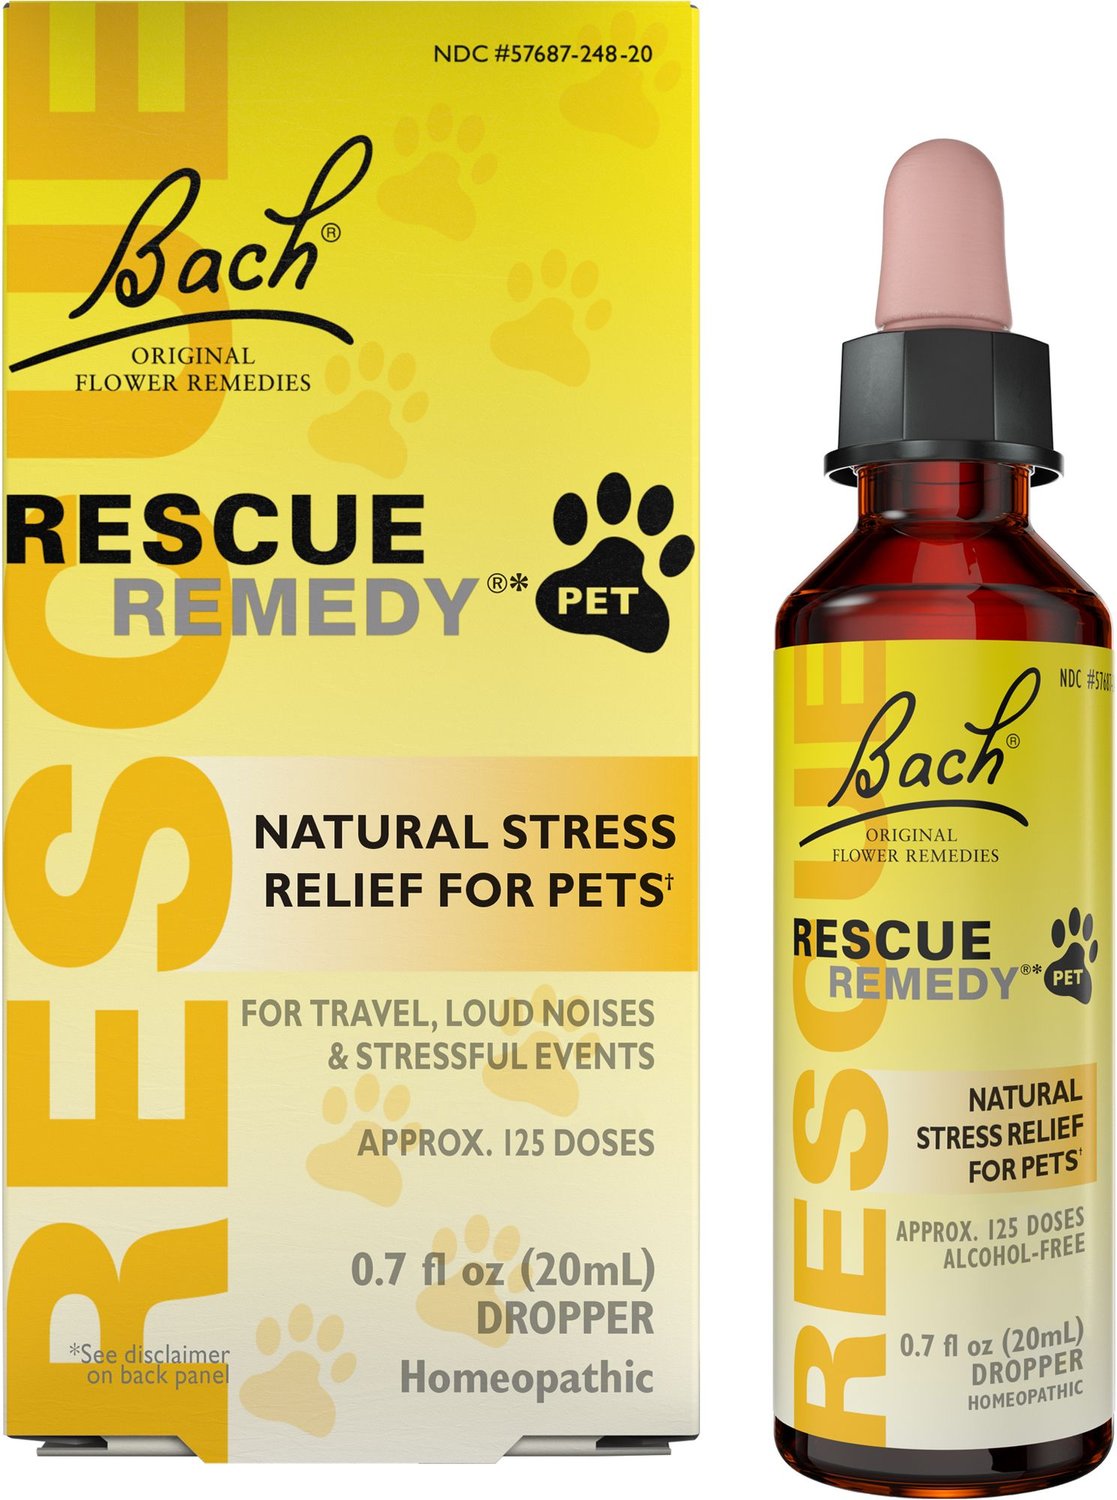 RESCUE REMEDY Stress Relief Pet 